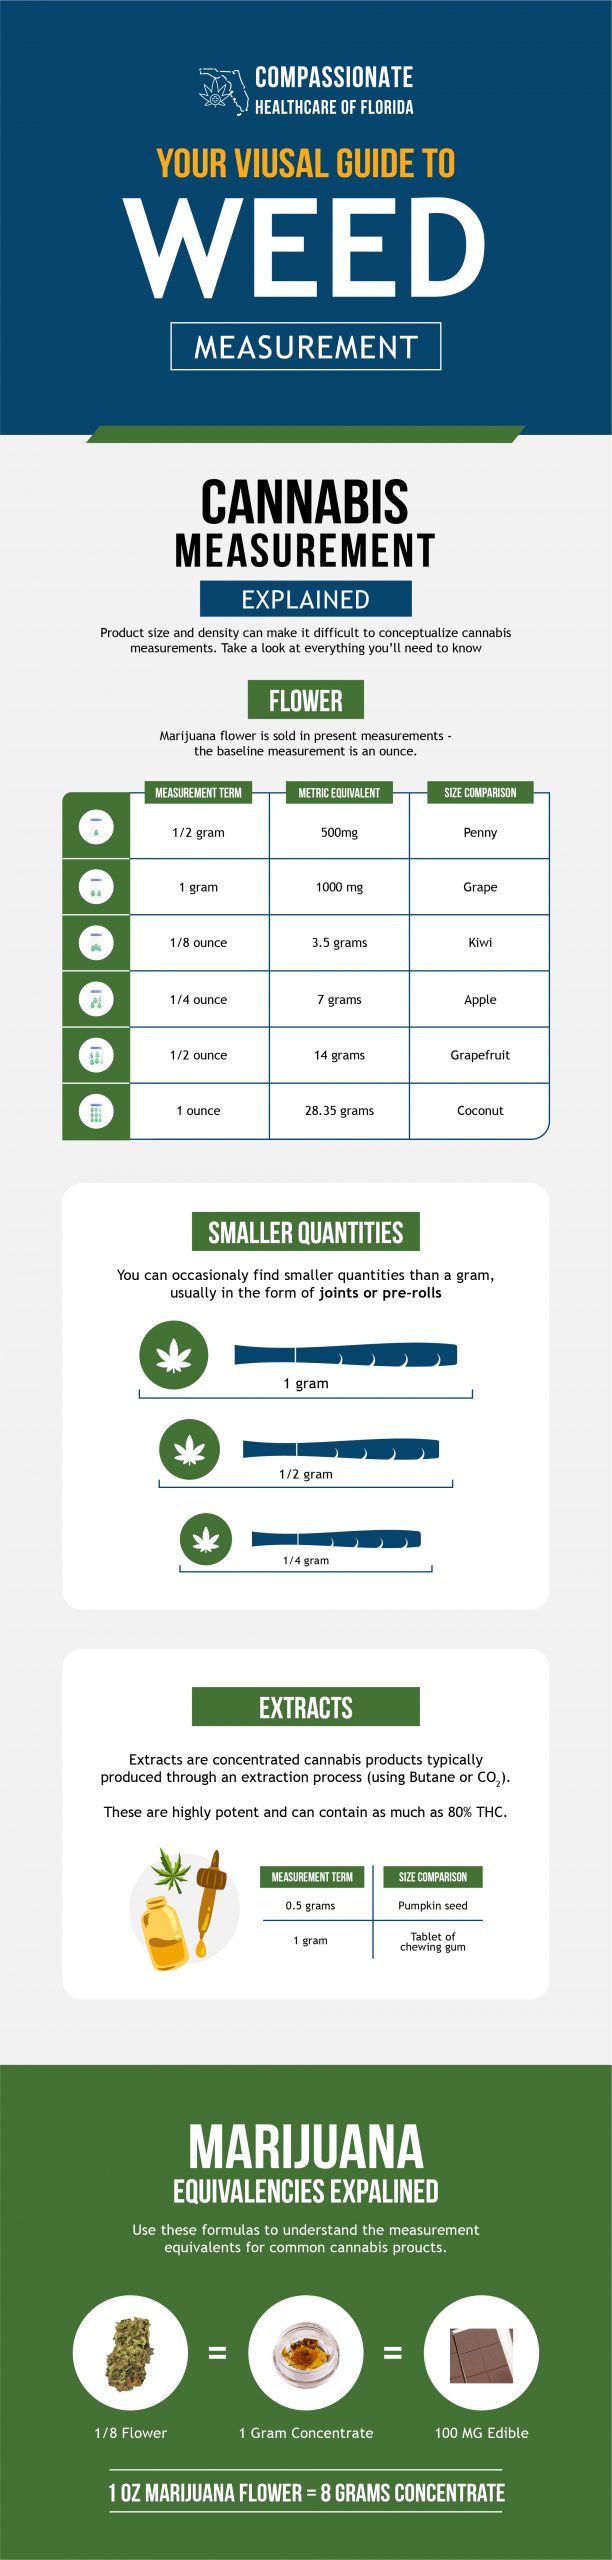 Weed Measurements Explained - Compassionate Healthcare of Florida